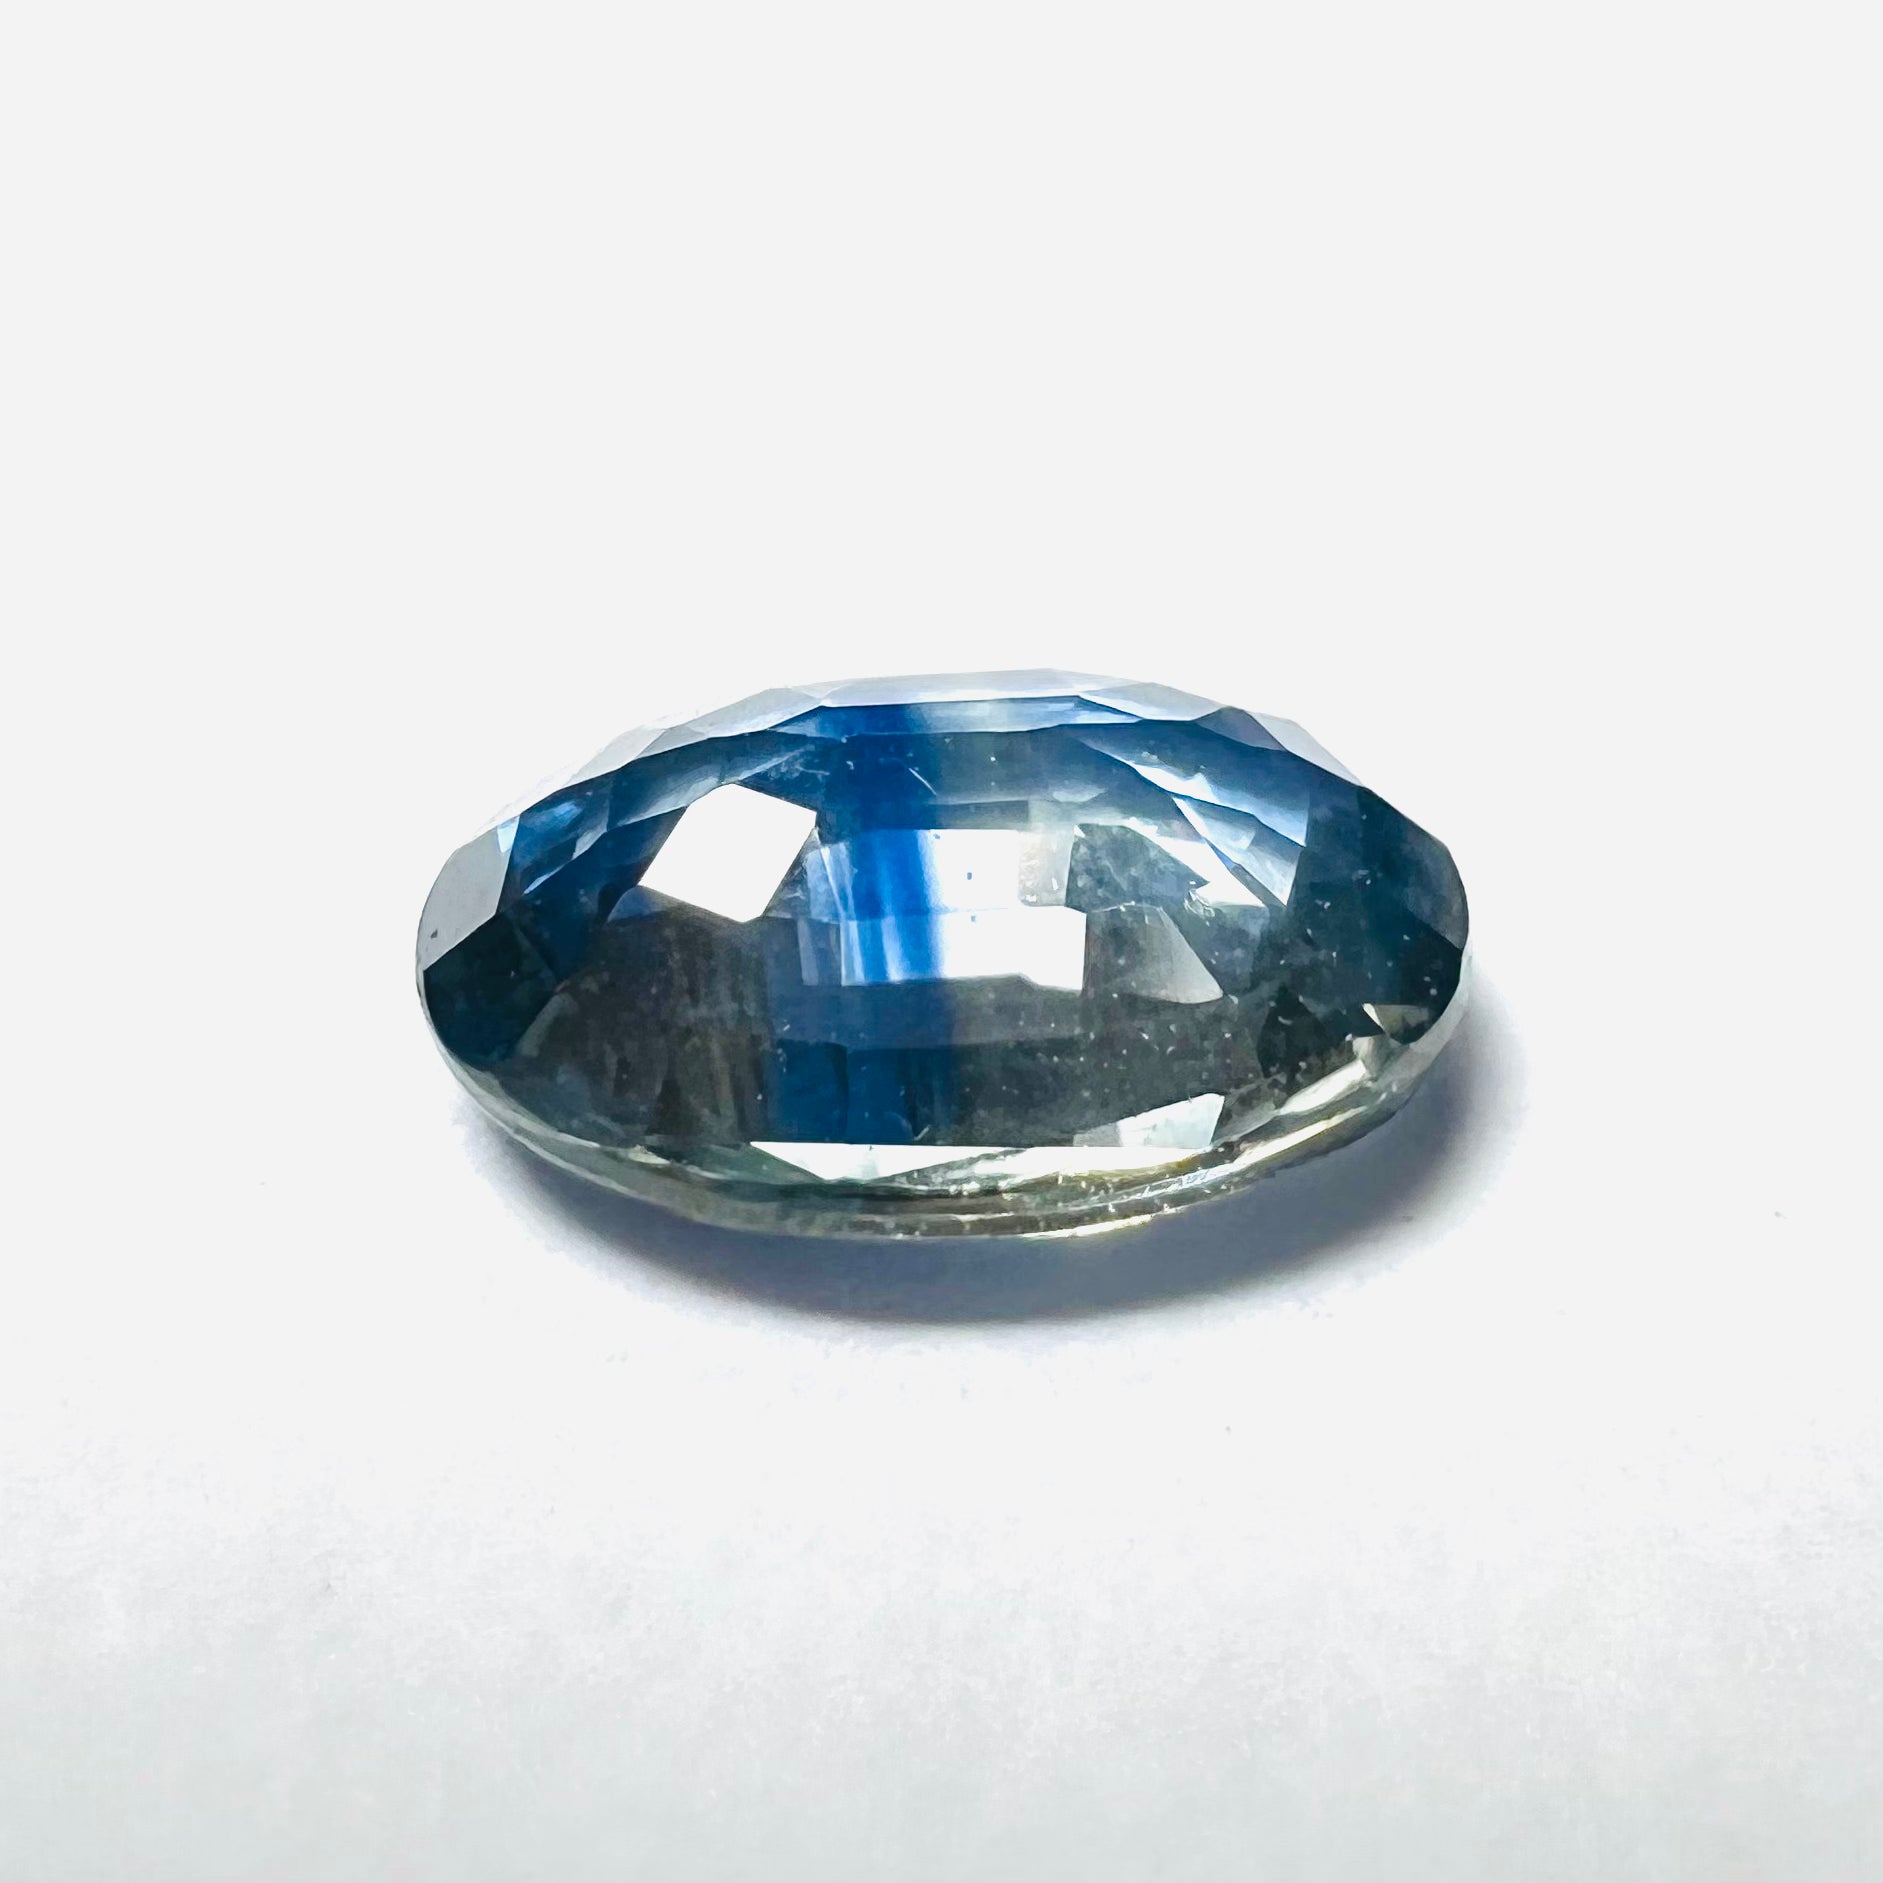 .90CTW Loose Blue Oval Sapphire7x5.5x2.5mmEarth mined Gemstone